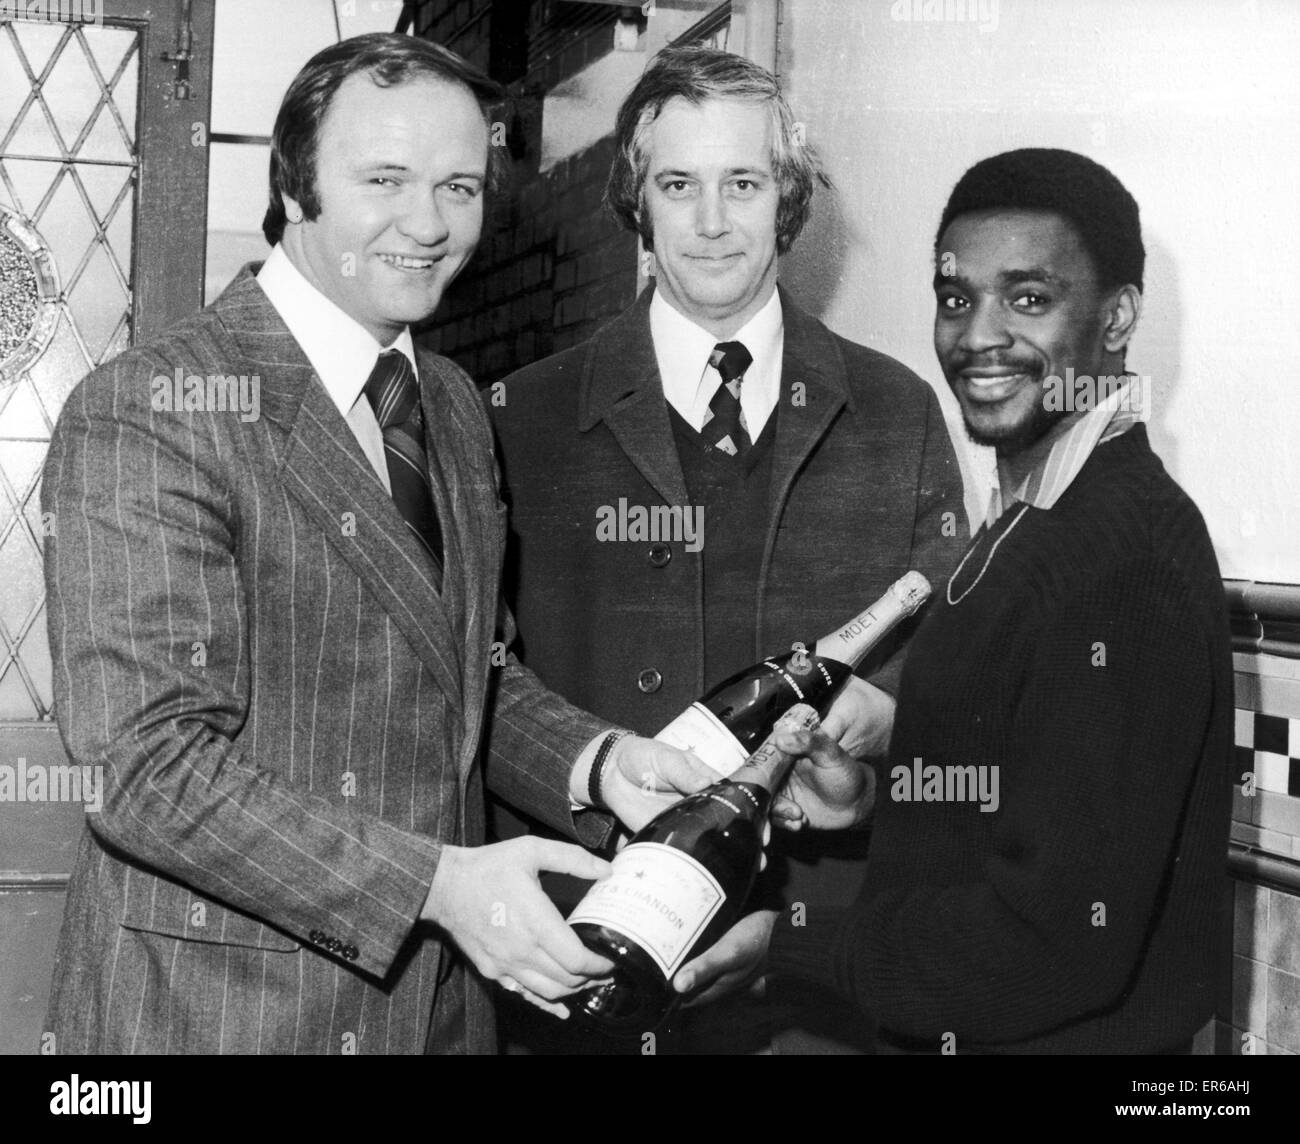 Image result for ron atkinson black player